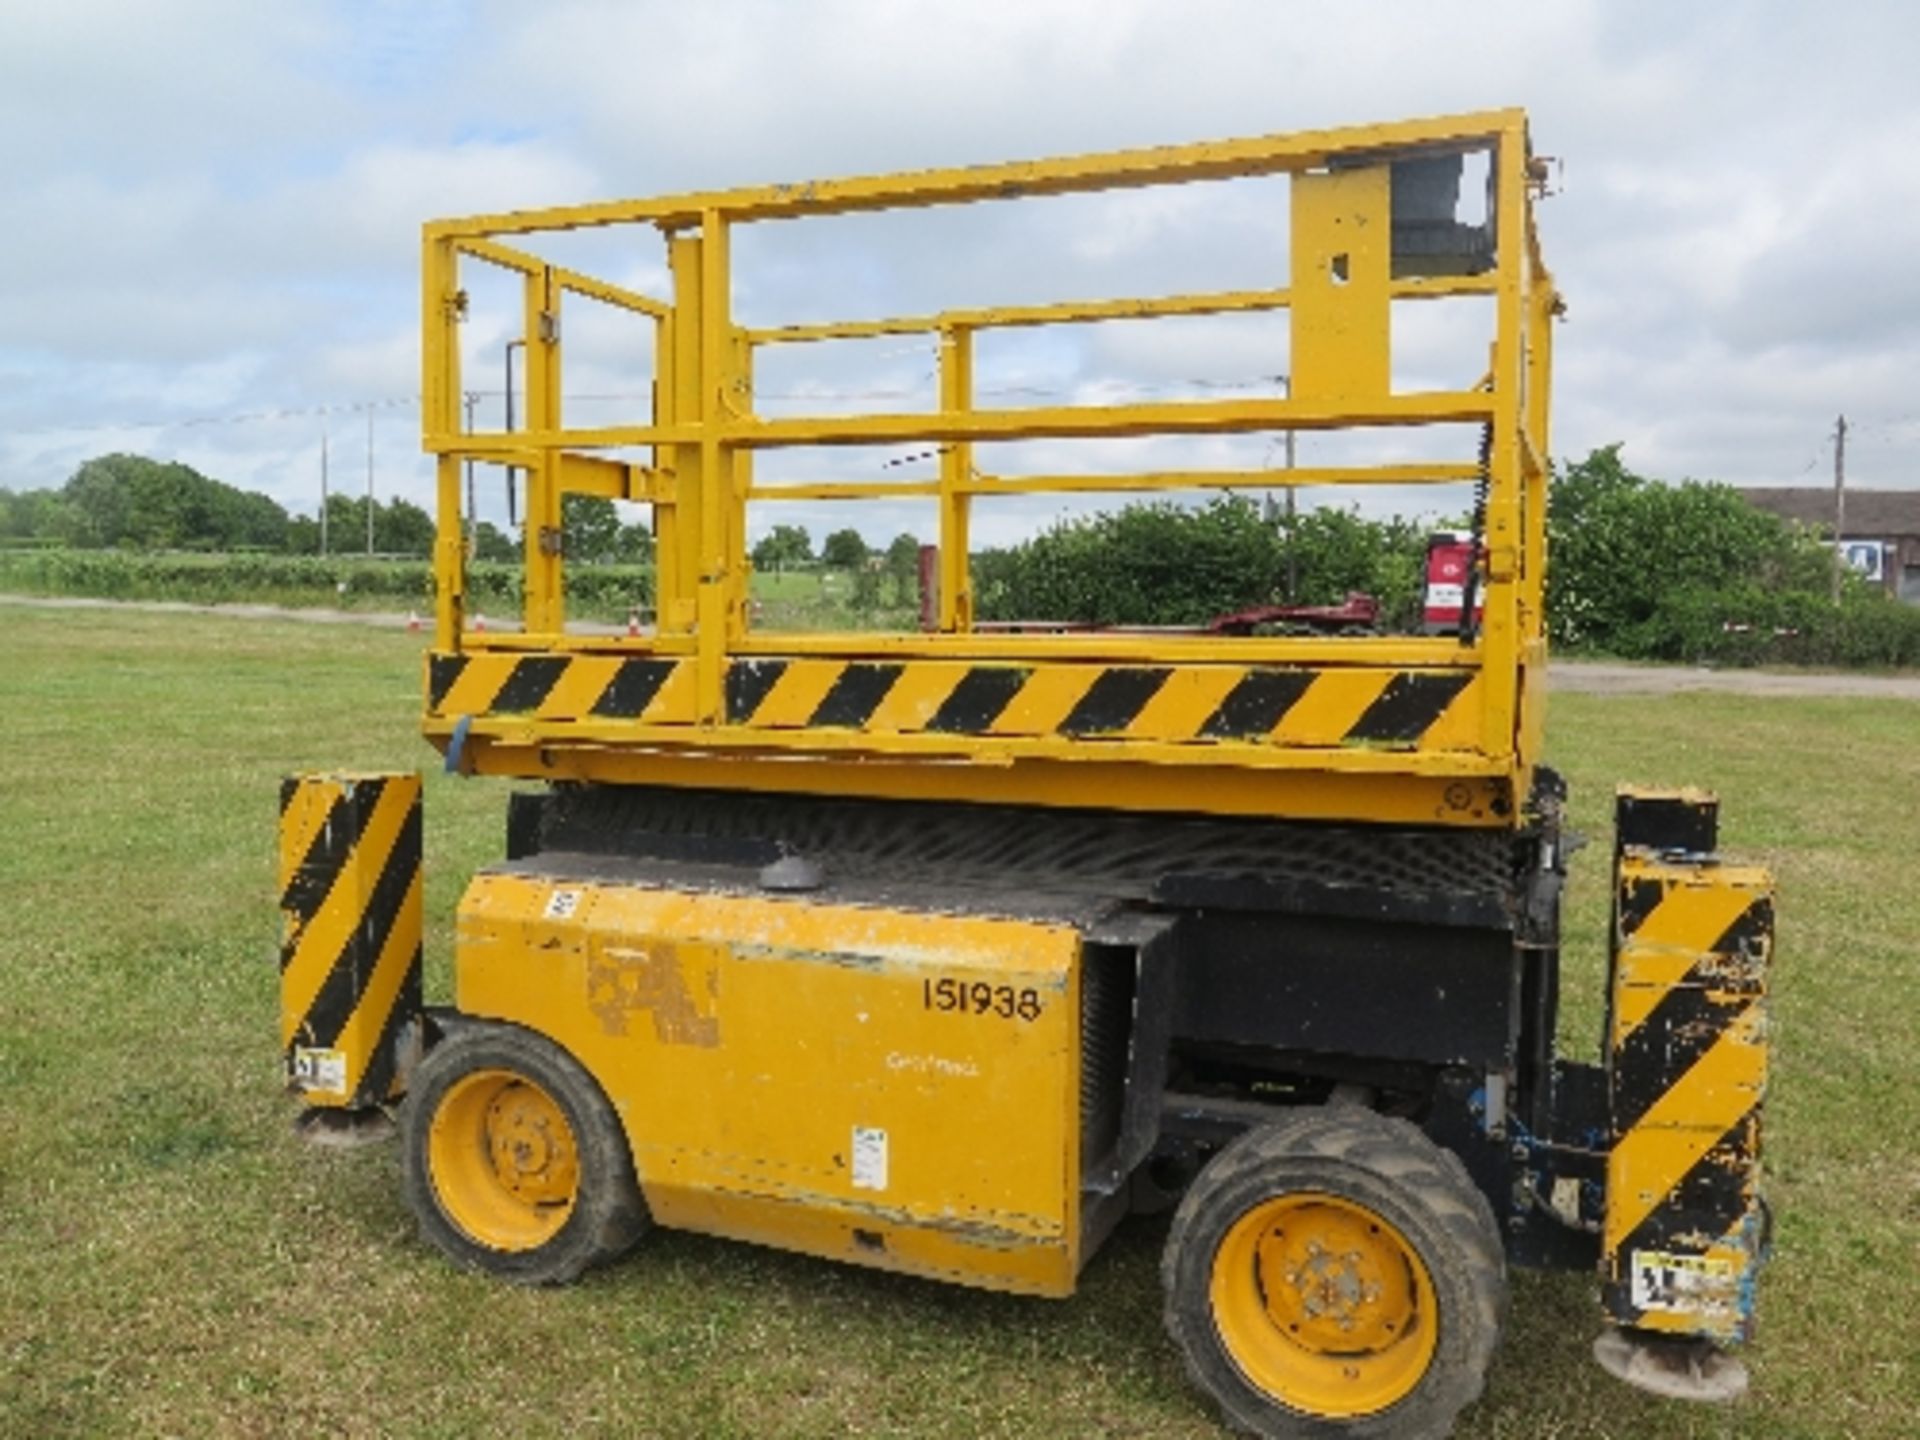 Genie GS3268 scissor lift 2006 151938
1,379 HOURS
ALL LOTS are SOLD AS SEEN WITHOUT WARRANTY